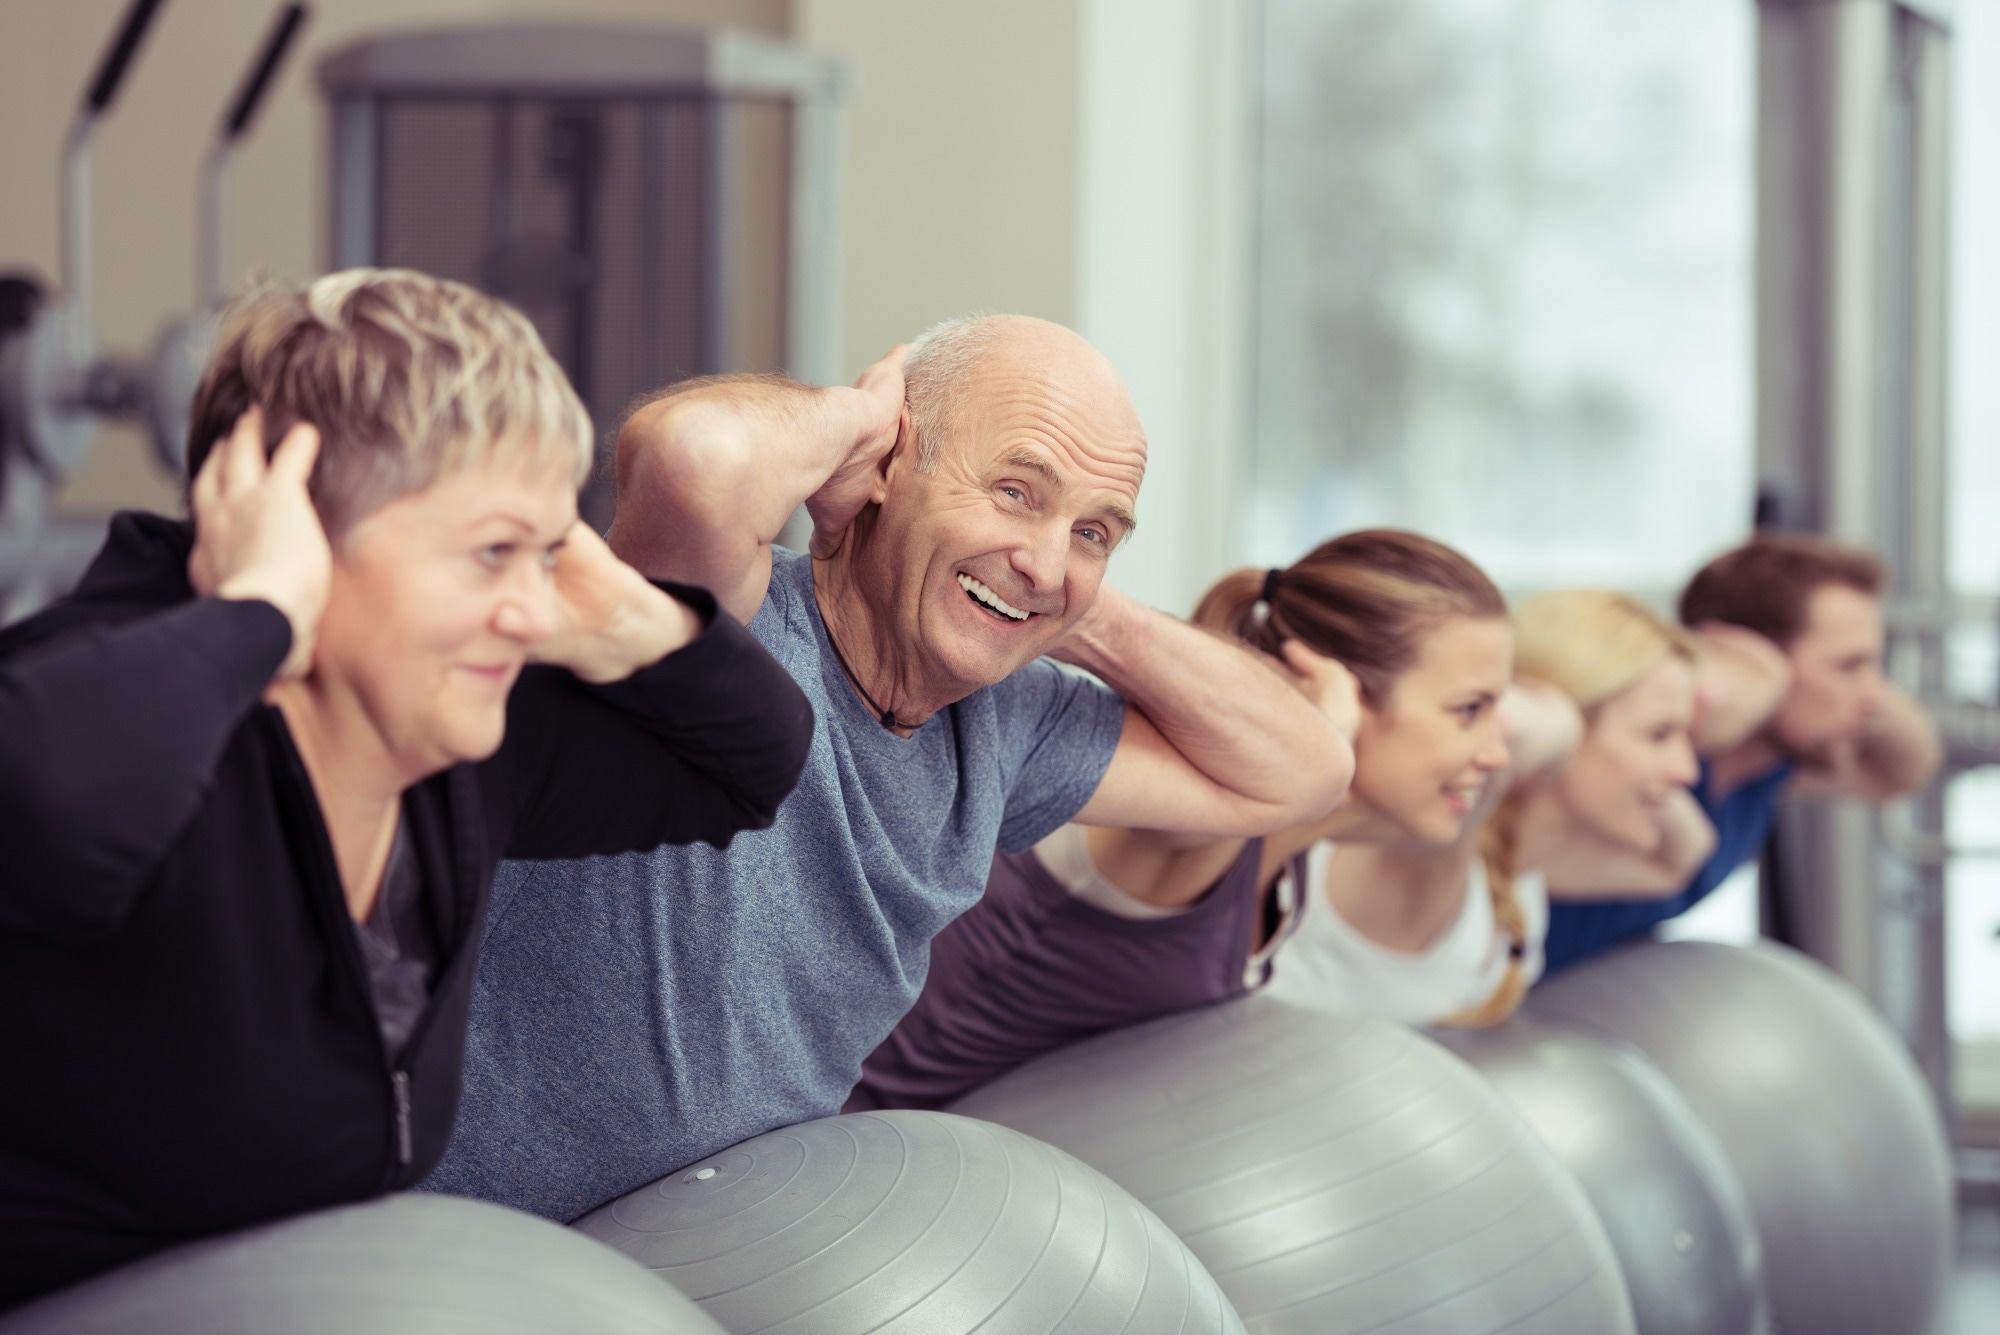 Study: The efficacy of Pilates method in patients with hypertension: systematic review and meta-analysis. Image Credit: ESB Professional / Shutterstock